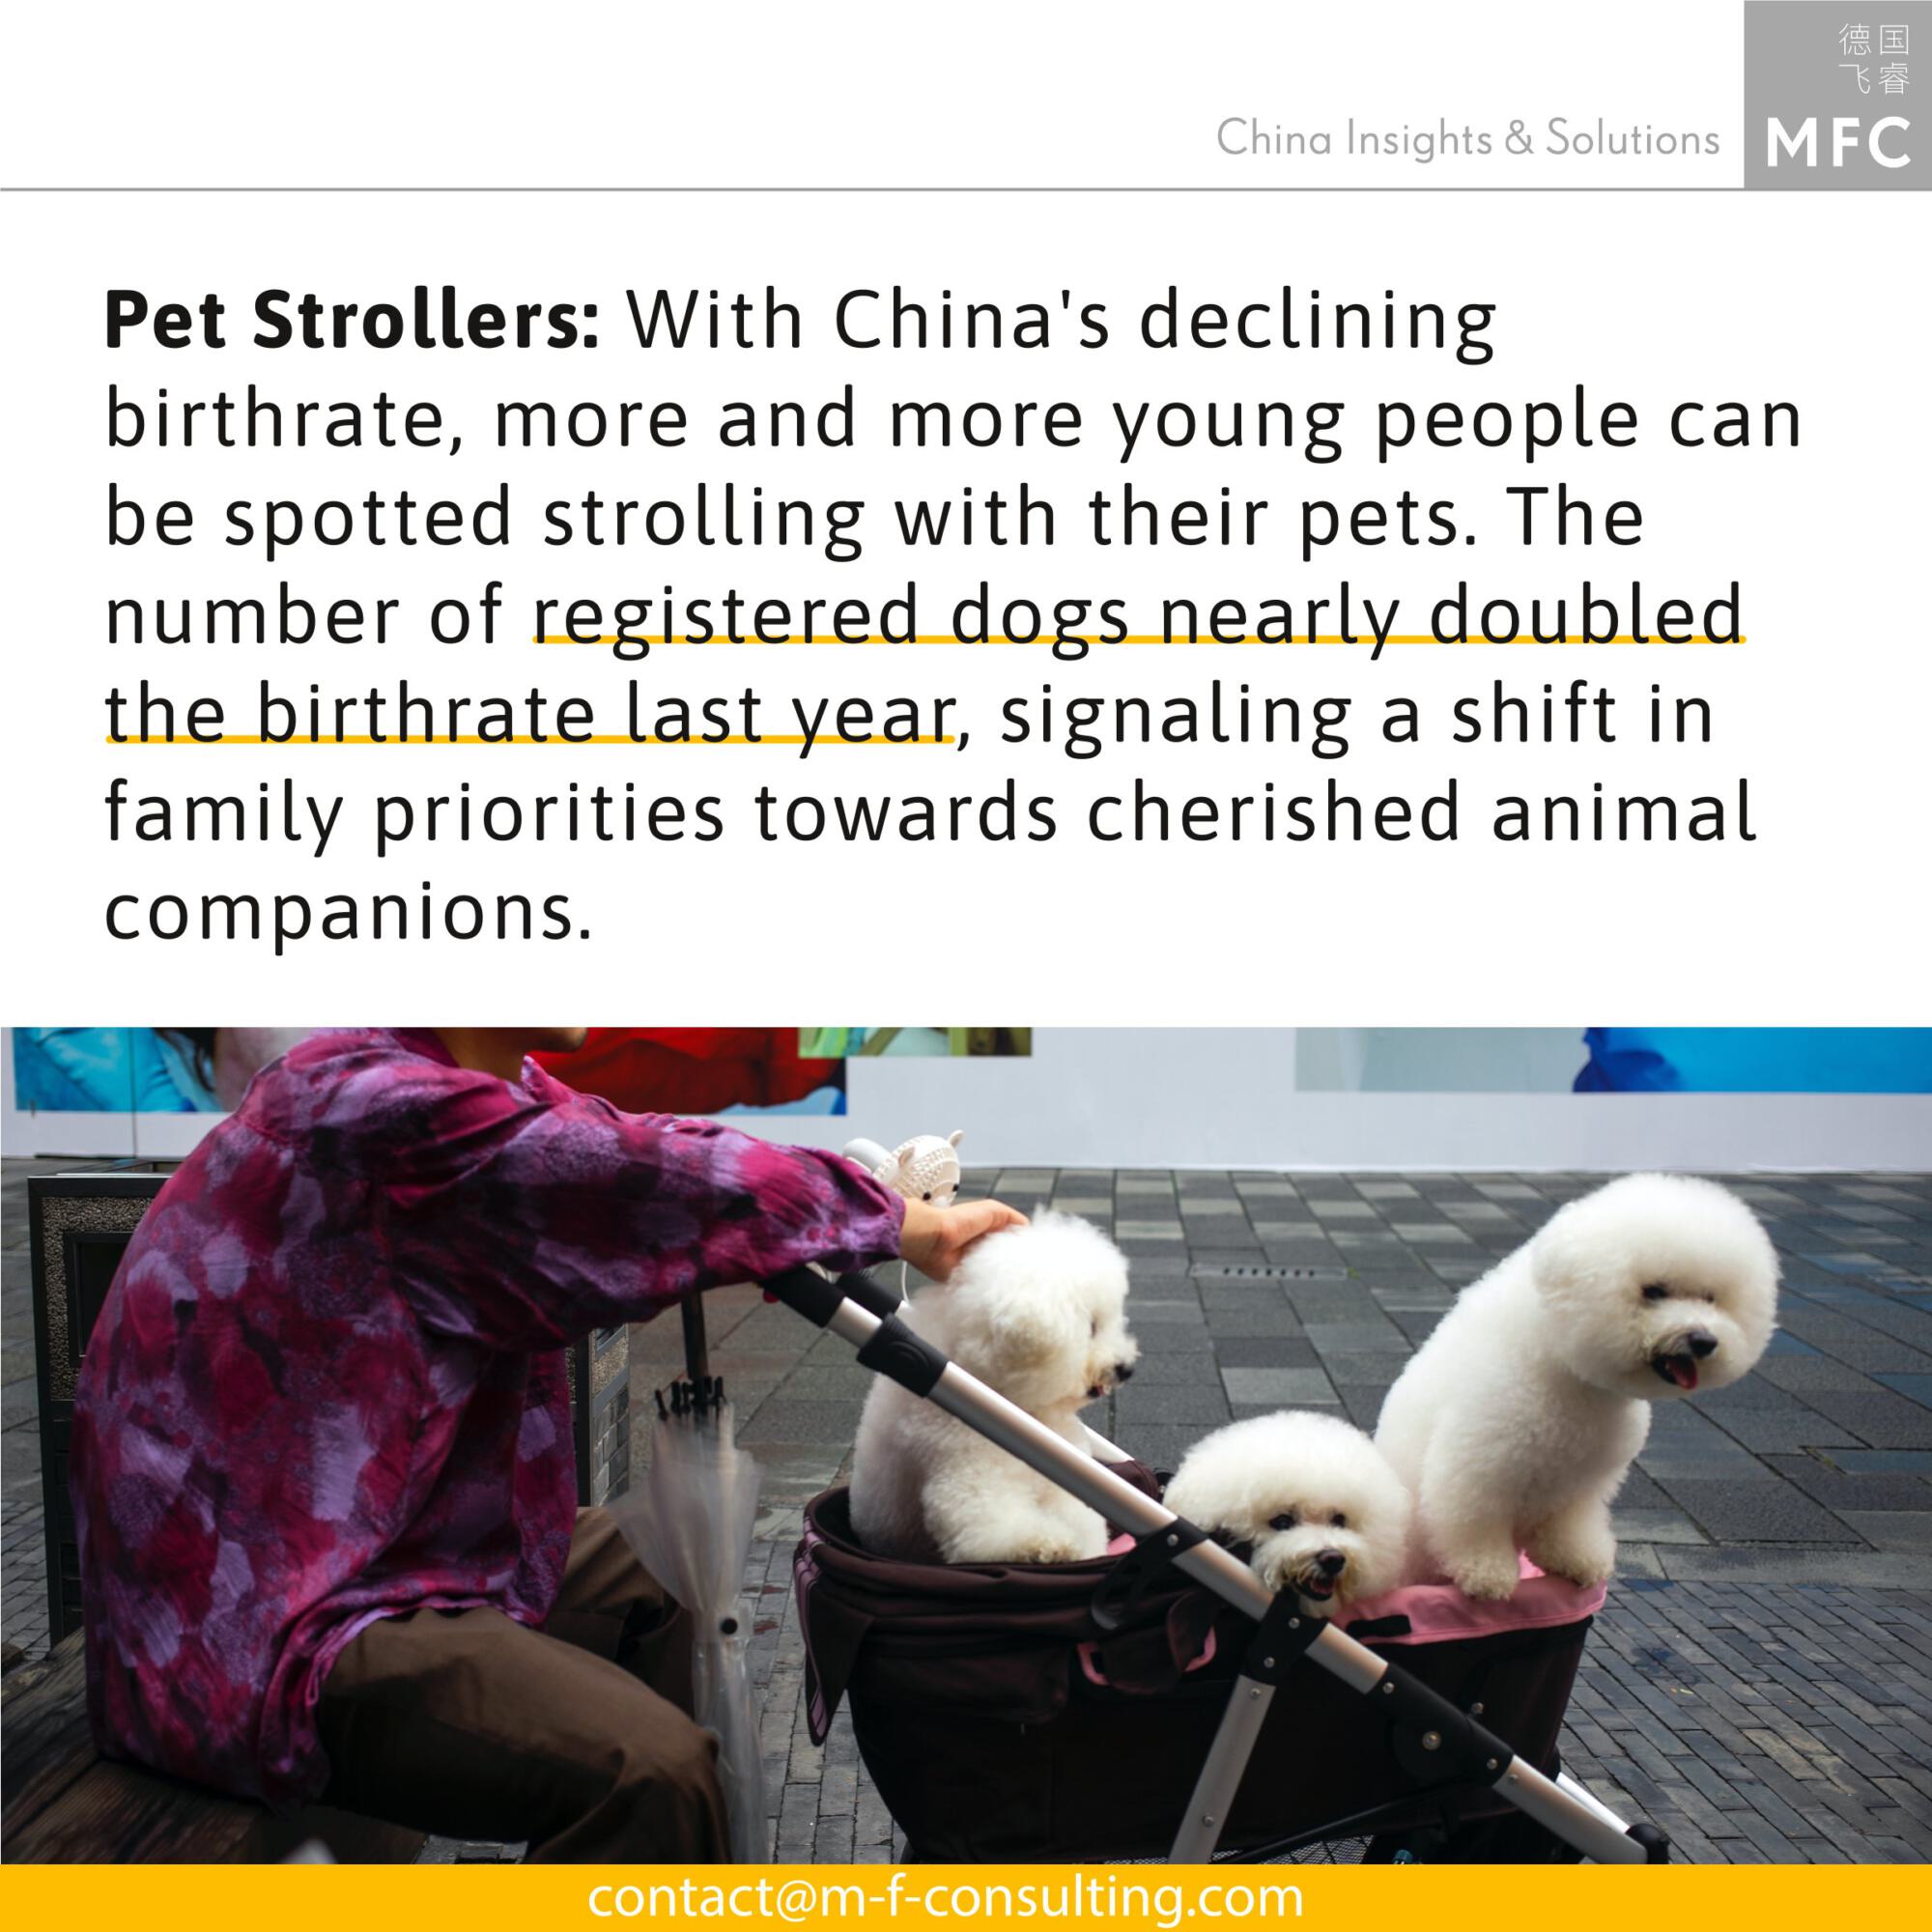 China's pet industry: With China's declining birthrate, more and more young people can be spotted strolling with their pets. The number of registered dogs nearly doubled the birthrate last year, signaling a shift in family priorities towards cherished animal companions.